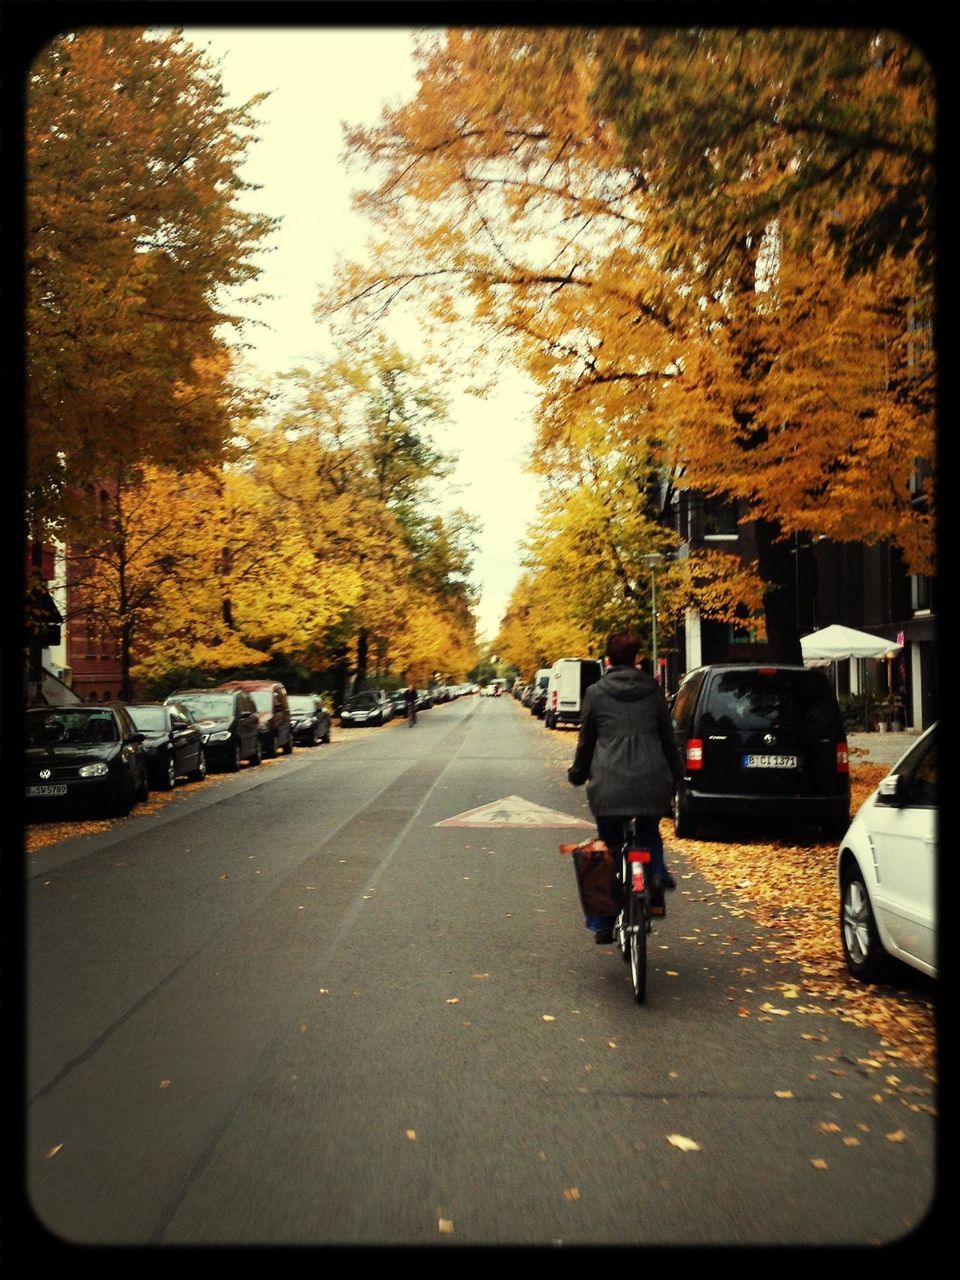 tree, transportation, rear view, the way forward, street, walking, men, road, lifestyles, transfer print, full length, car, person, mode of transport, autumn, diminishing perspective, leisure activity, auto post production filter